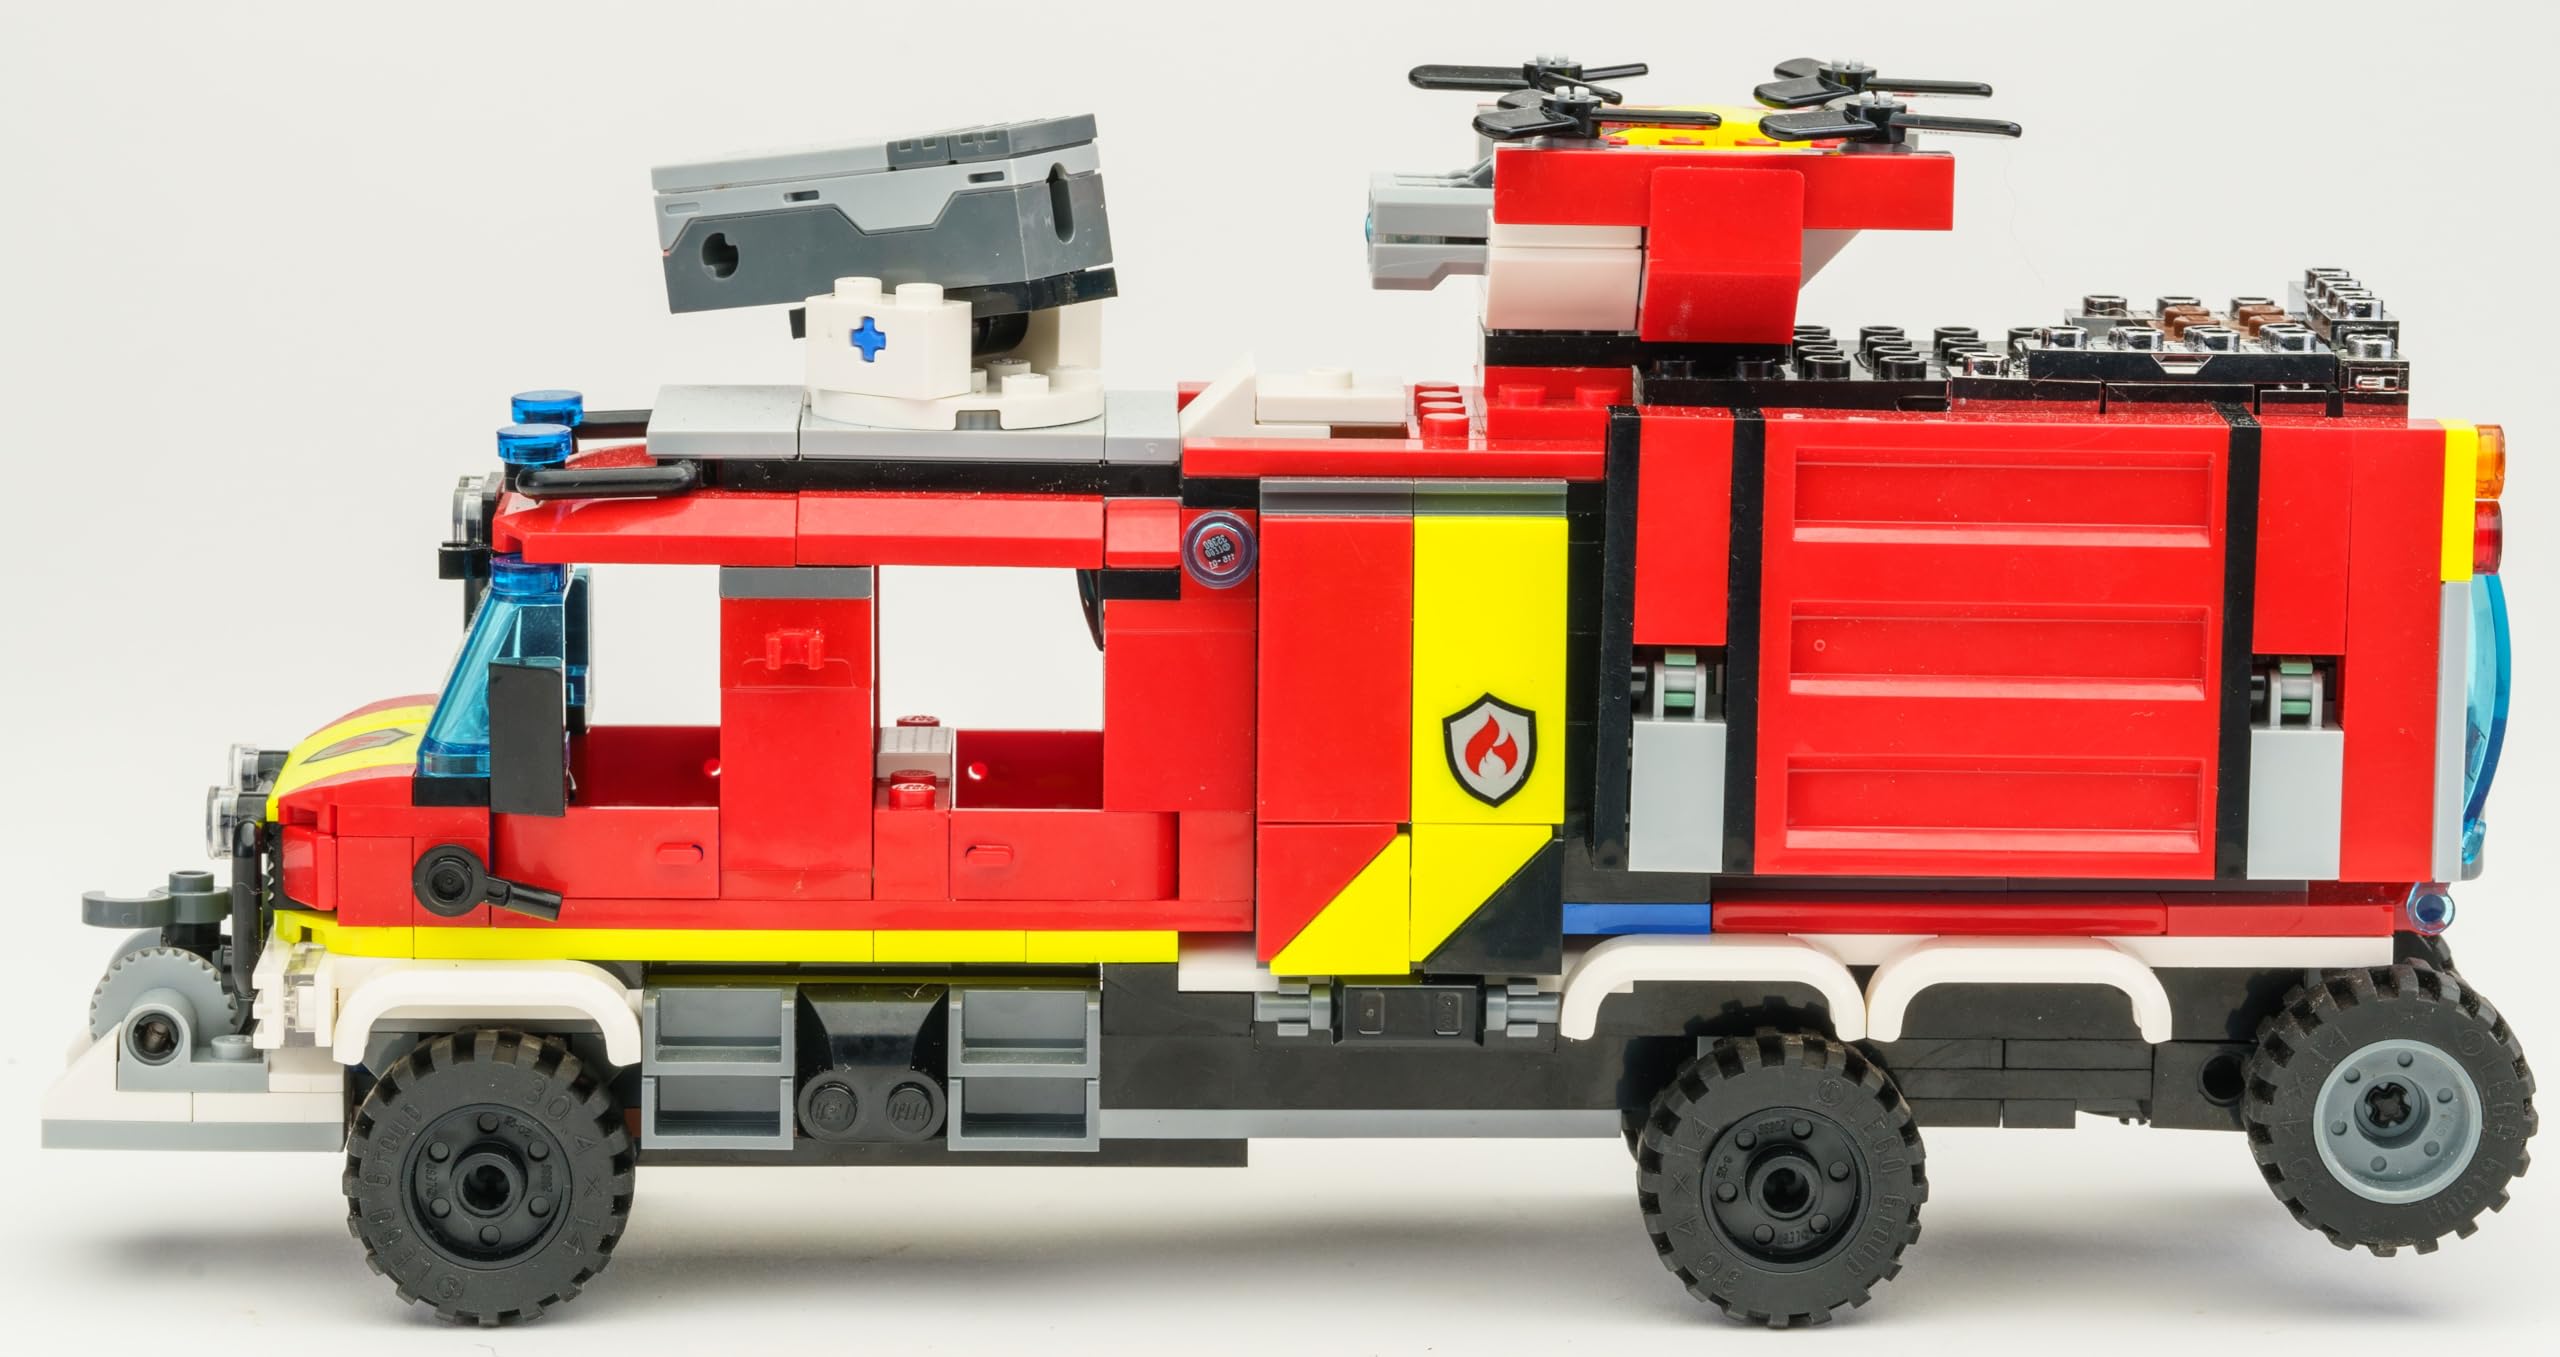 Dakott Conductive Chrome-Plated Building Bricks Kit for LegoCity Fire Command Unit. Compatible with 60374 Model- Not Include The LegoSet. Bring Life to Your LegoCity Fire Truck